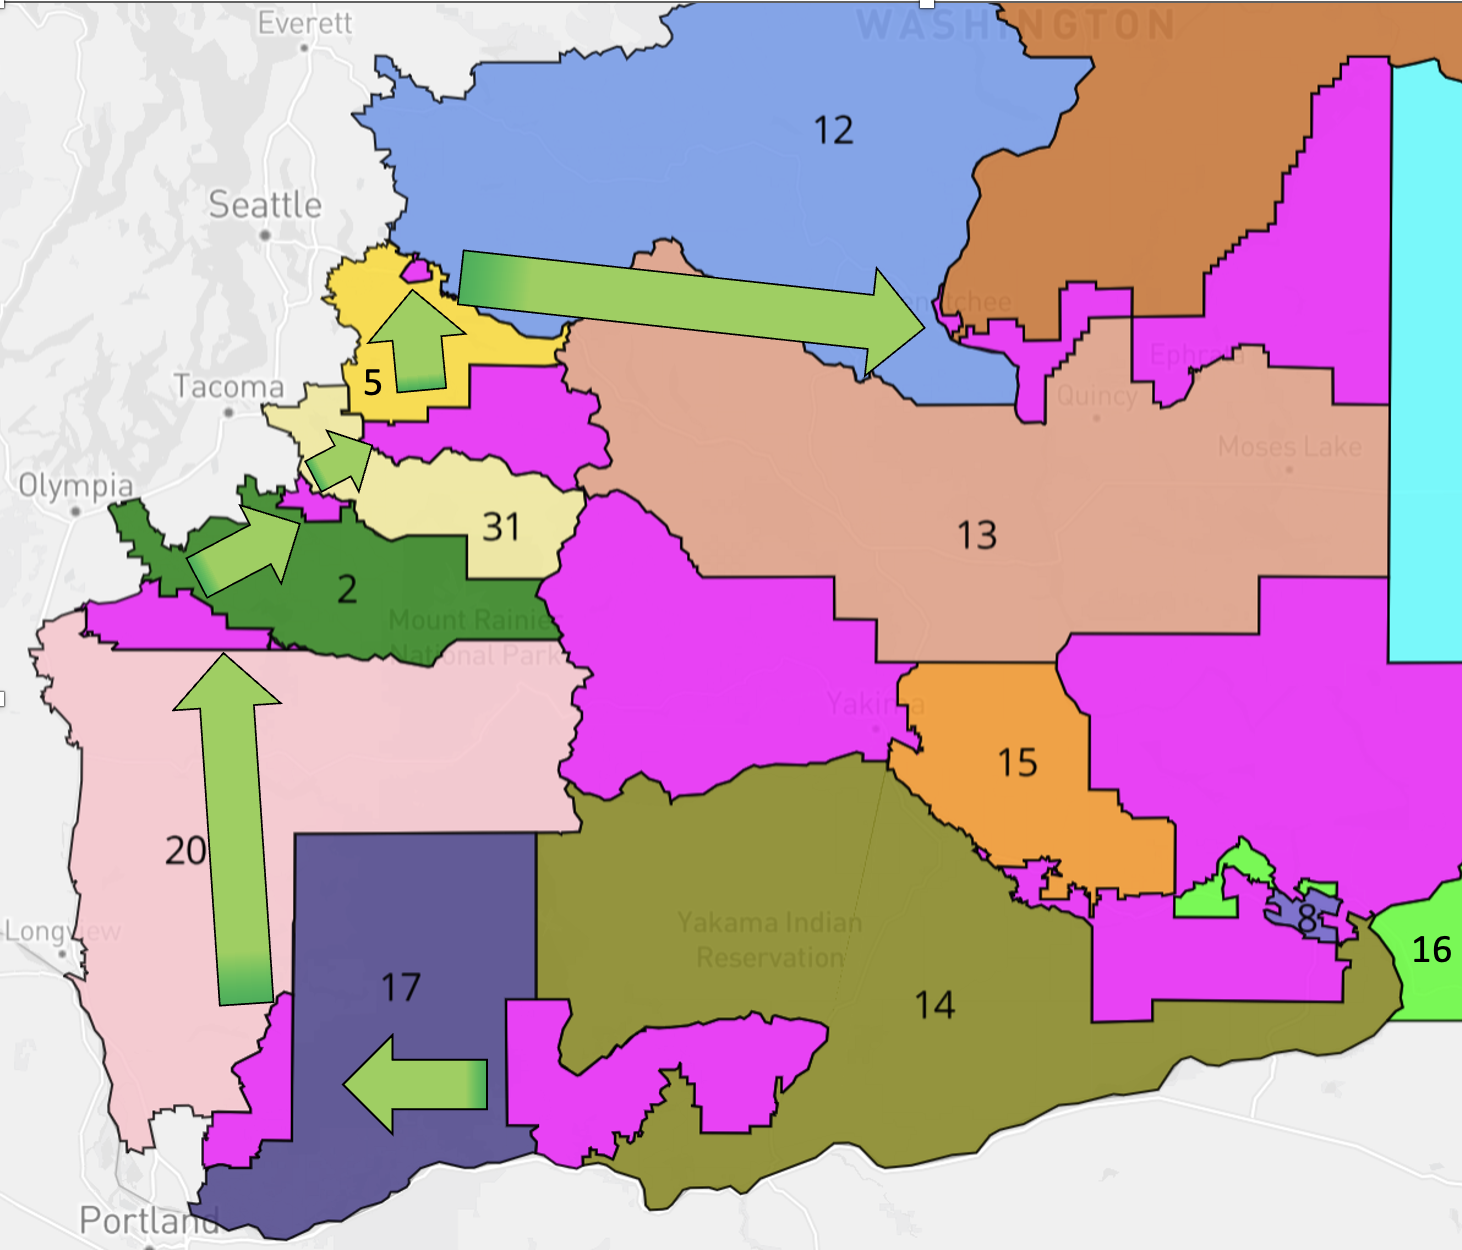 The Swirl: Pink areas highlight the population shift incorporated into the new legislative districts (approx. 502,000 people). Smaller pink areas starting in SW LD14 and moving along the arrows to Wenatchee represent approximately 15,600 people shifted from one district to the next.